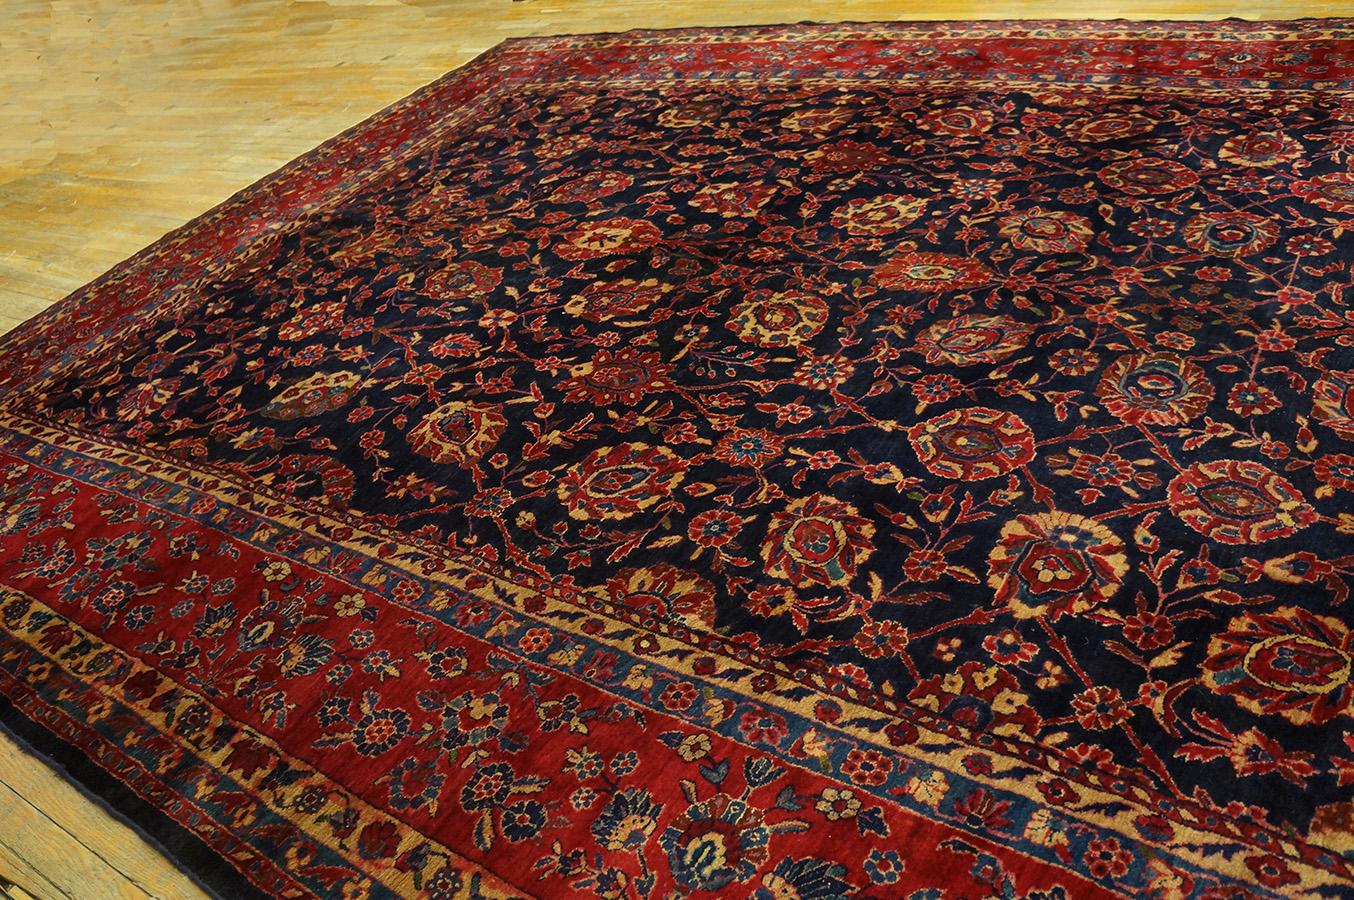 1920s Persian Sarouk Carpet ( 11' x 20' - 335 x 610 ) In Good Condition For Sale In New York, NY